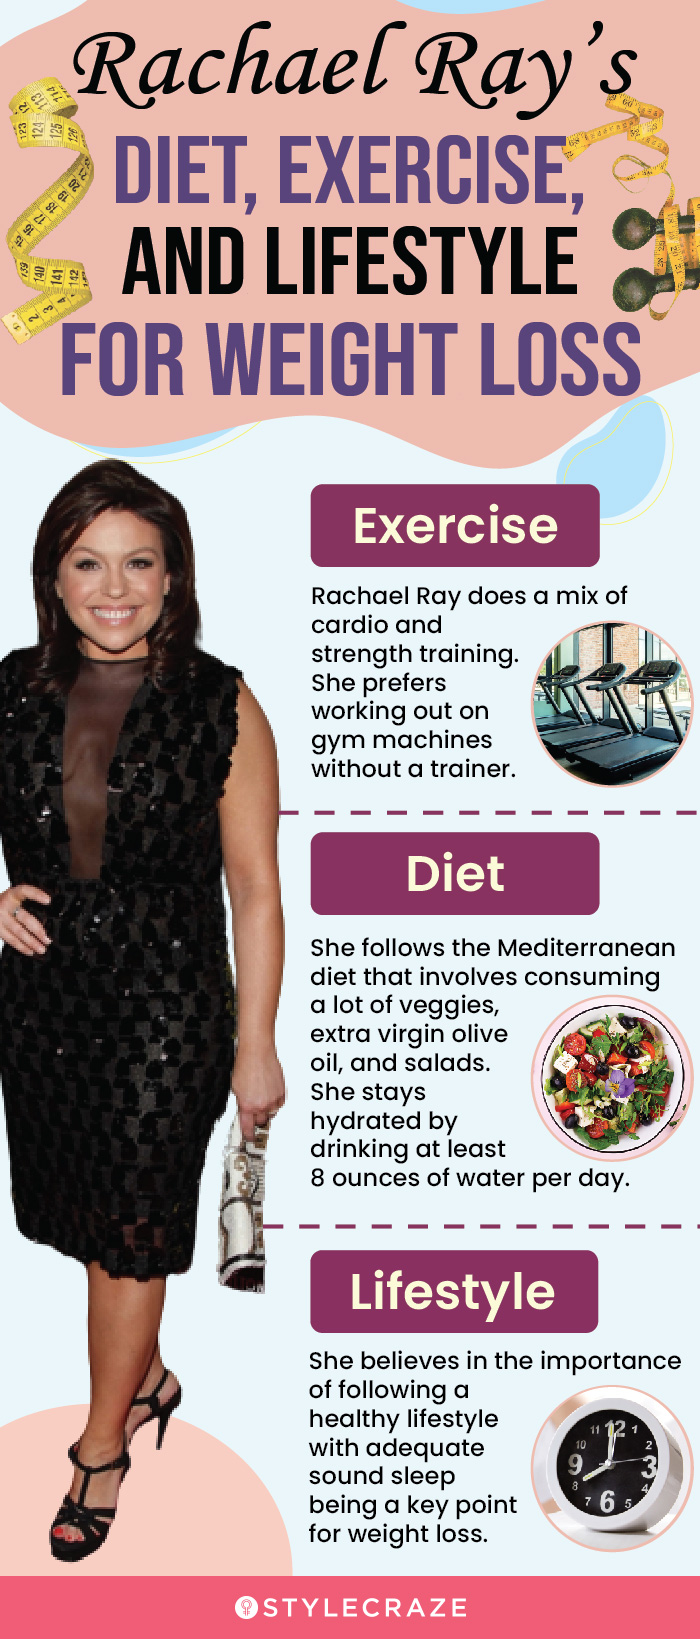 rachael ray’s diet, exercise, and lifestyle for weight loss (infographic)